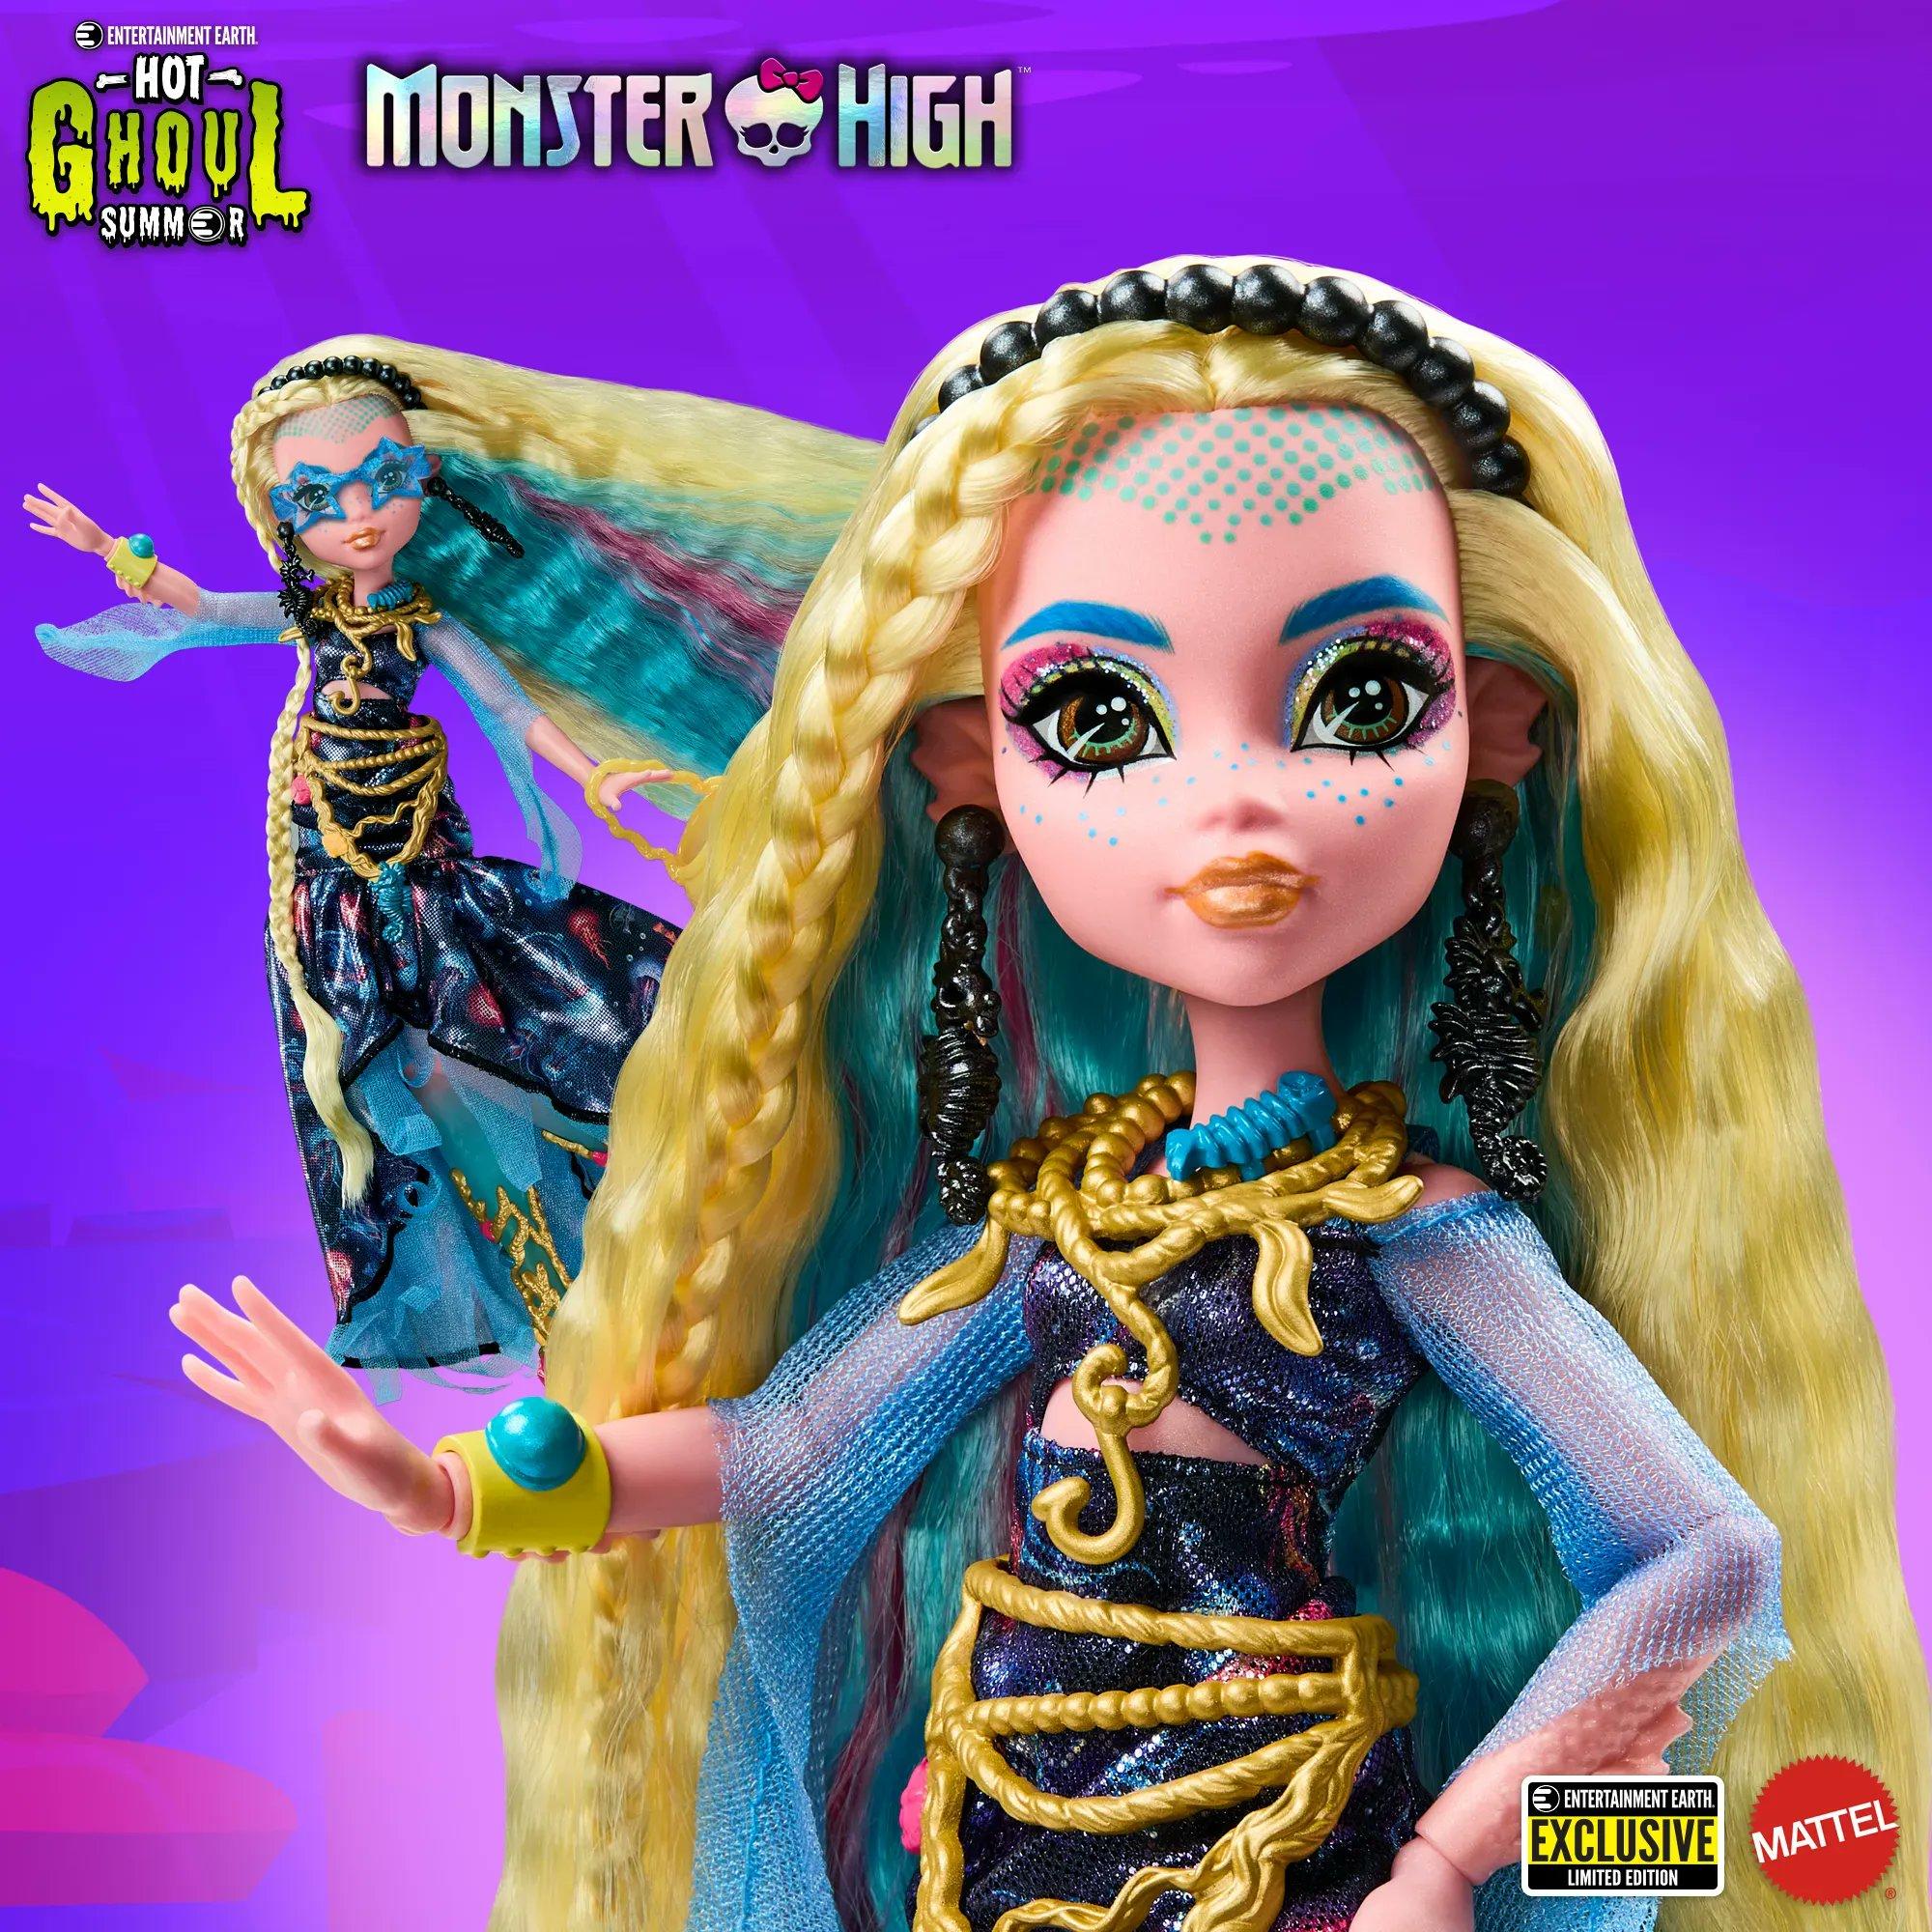 Monster High Fearidescent Series of Dolls Offers a Spooktacular